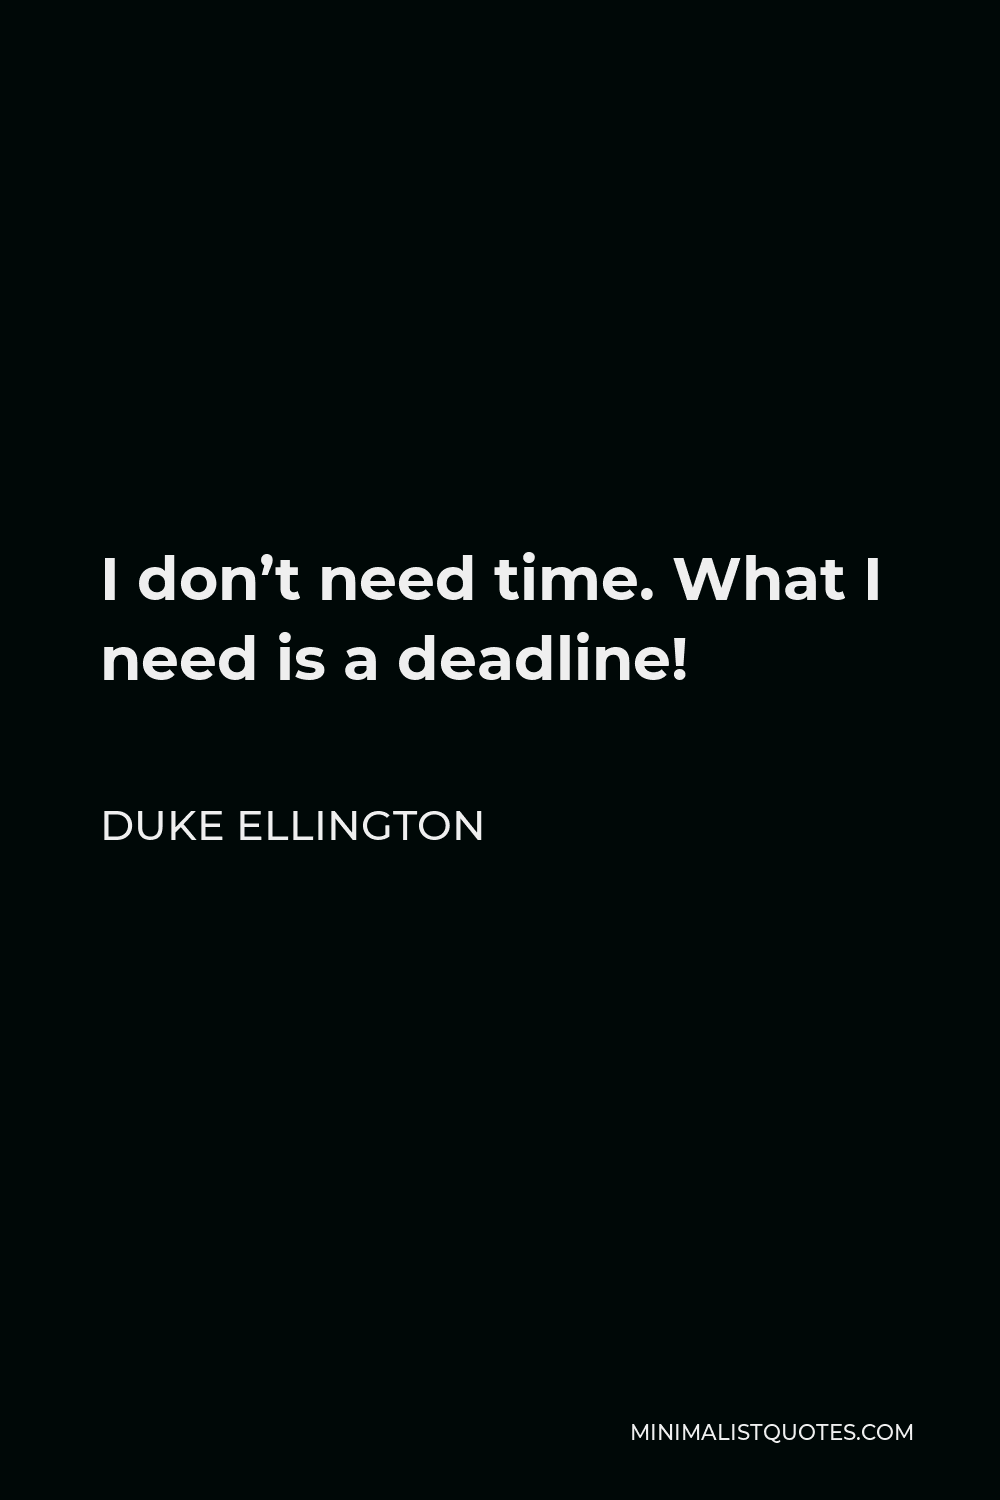 Duke Ellington Quote - I don’t need time. What I need is a deadline!